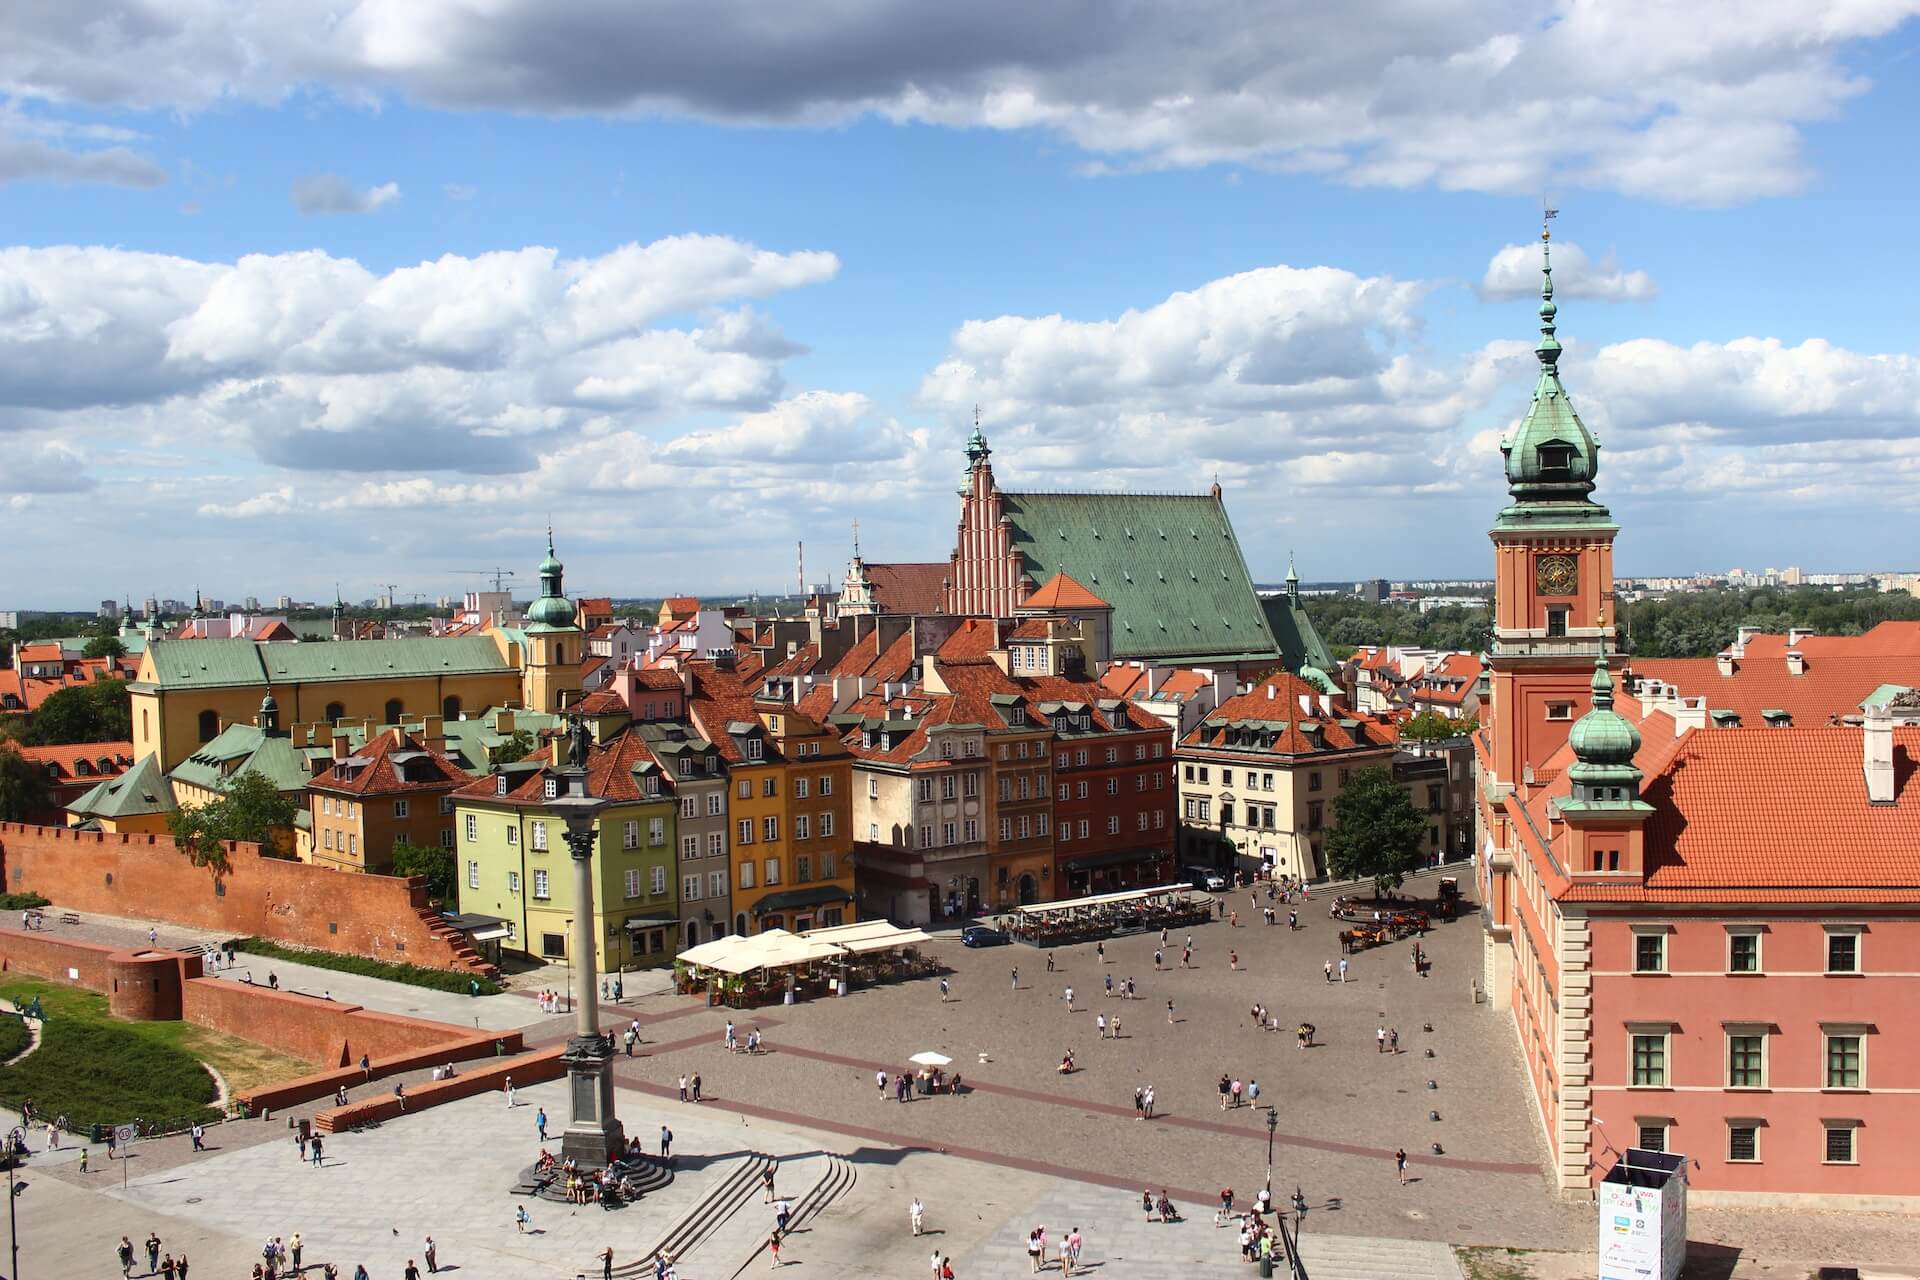 What to see in Warsaw